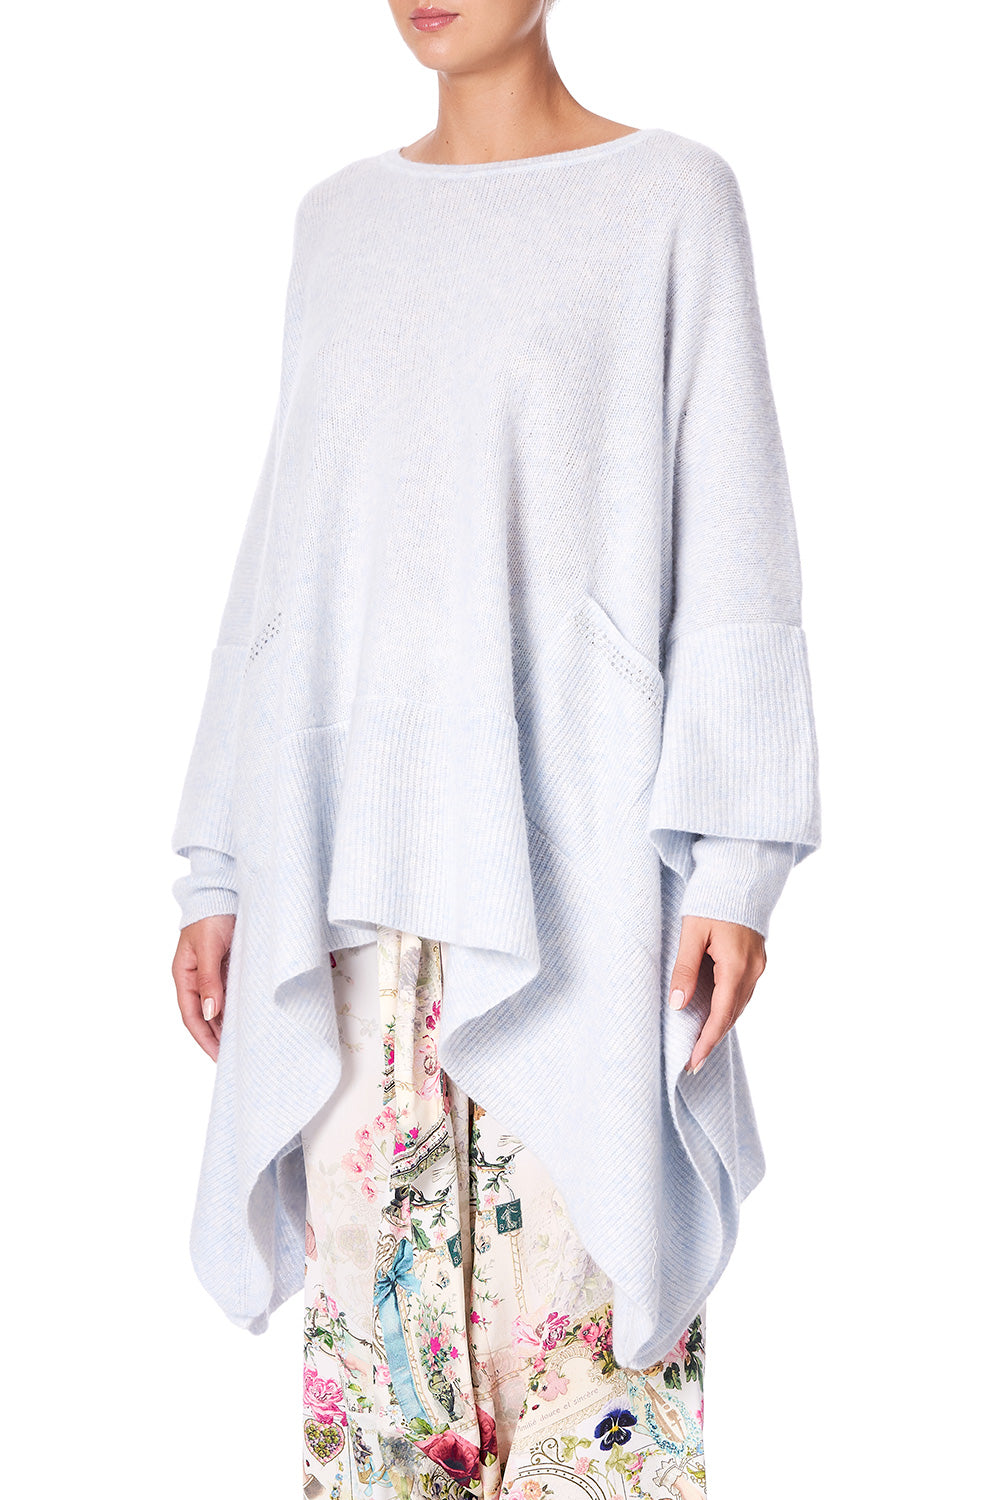 LUX PONCHO CAROUSEL MADEMOISELLE